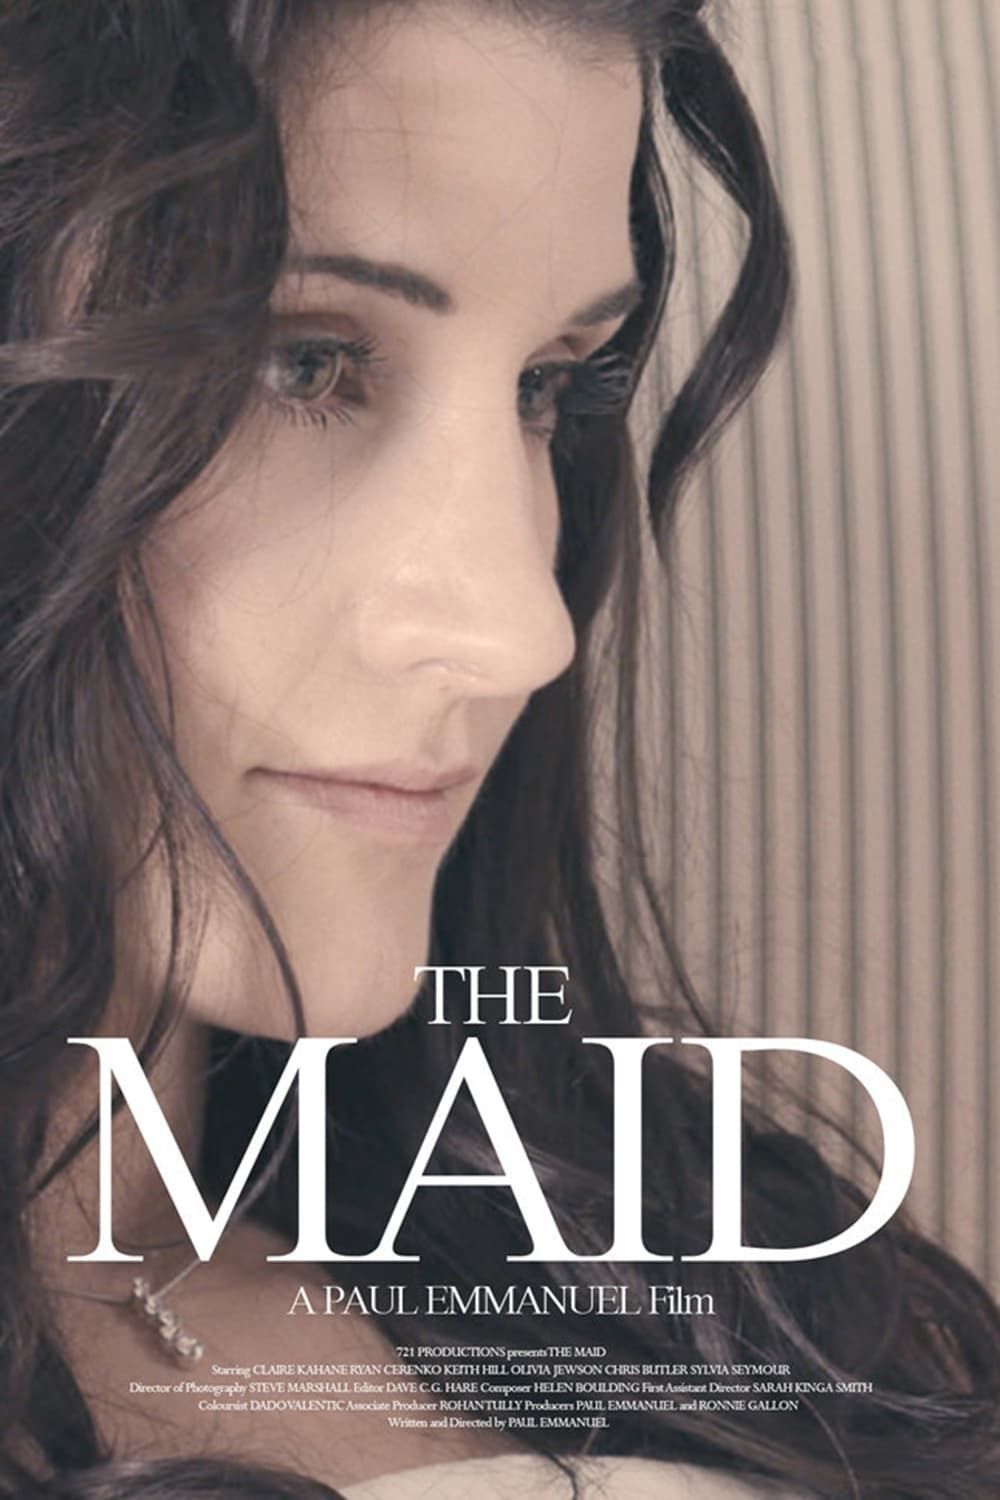 the maid 2014 movie online free